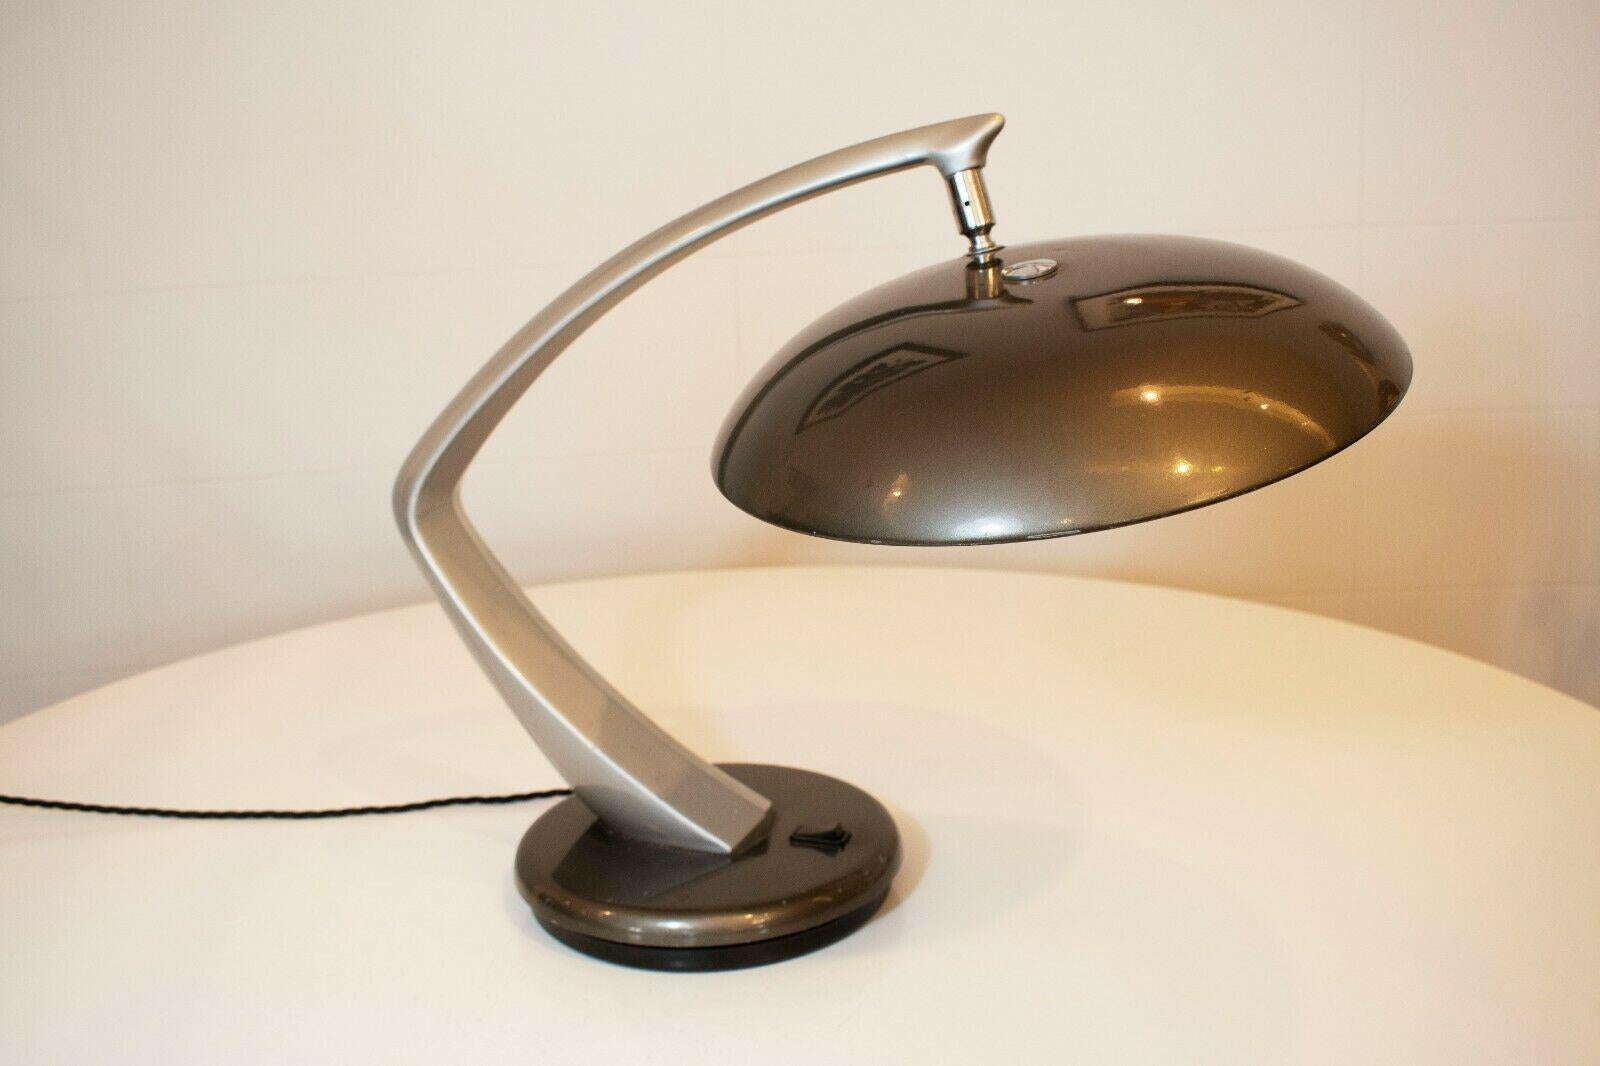 Super cool and stylish boomerang turnable desk light made in Spain by Fase in the 1970's in a light grey/silver colour.

This iconic lamp, designed in the style of Space Age, was used in many space movies of the period such as Star Trek. 

Very cool